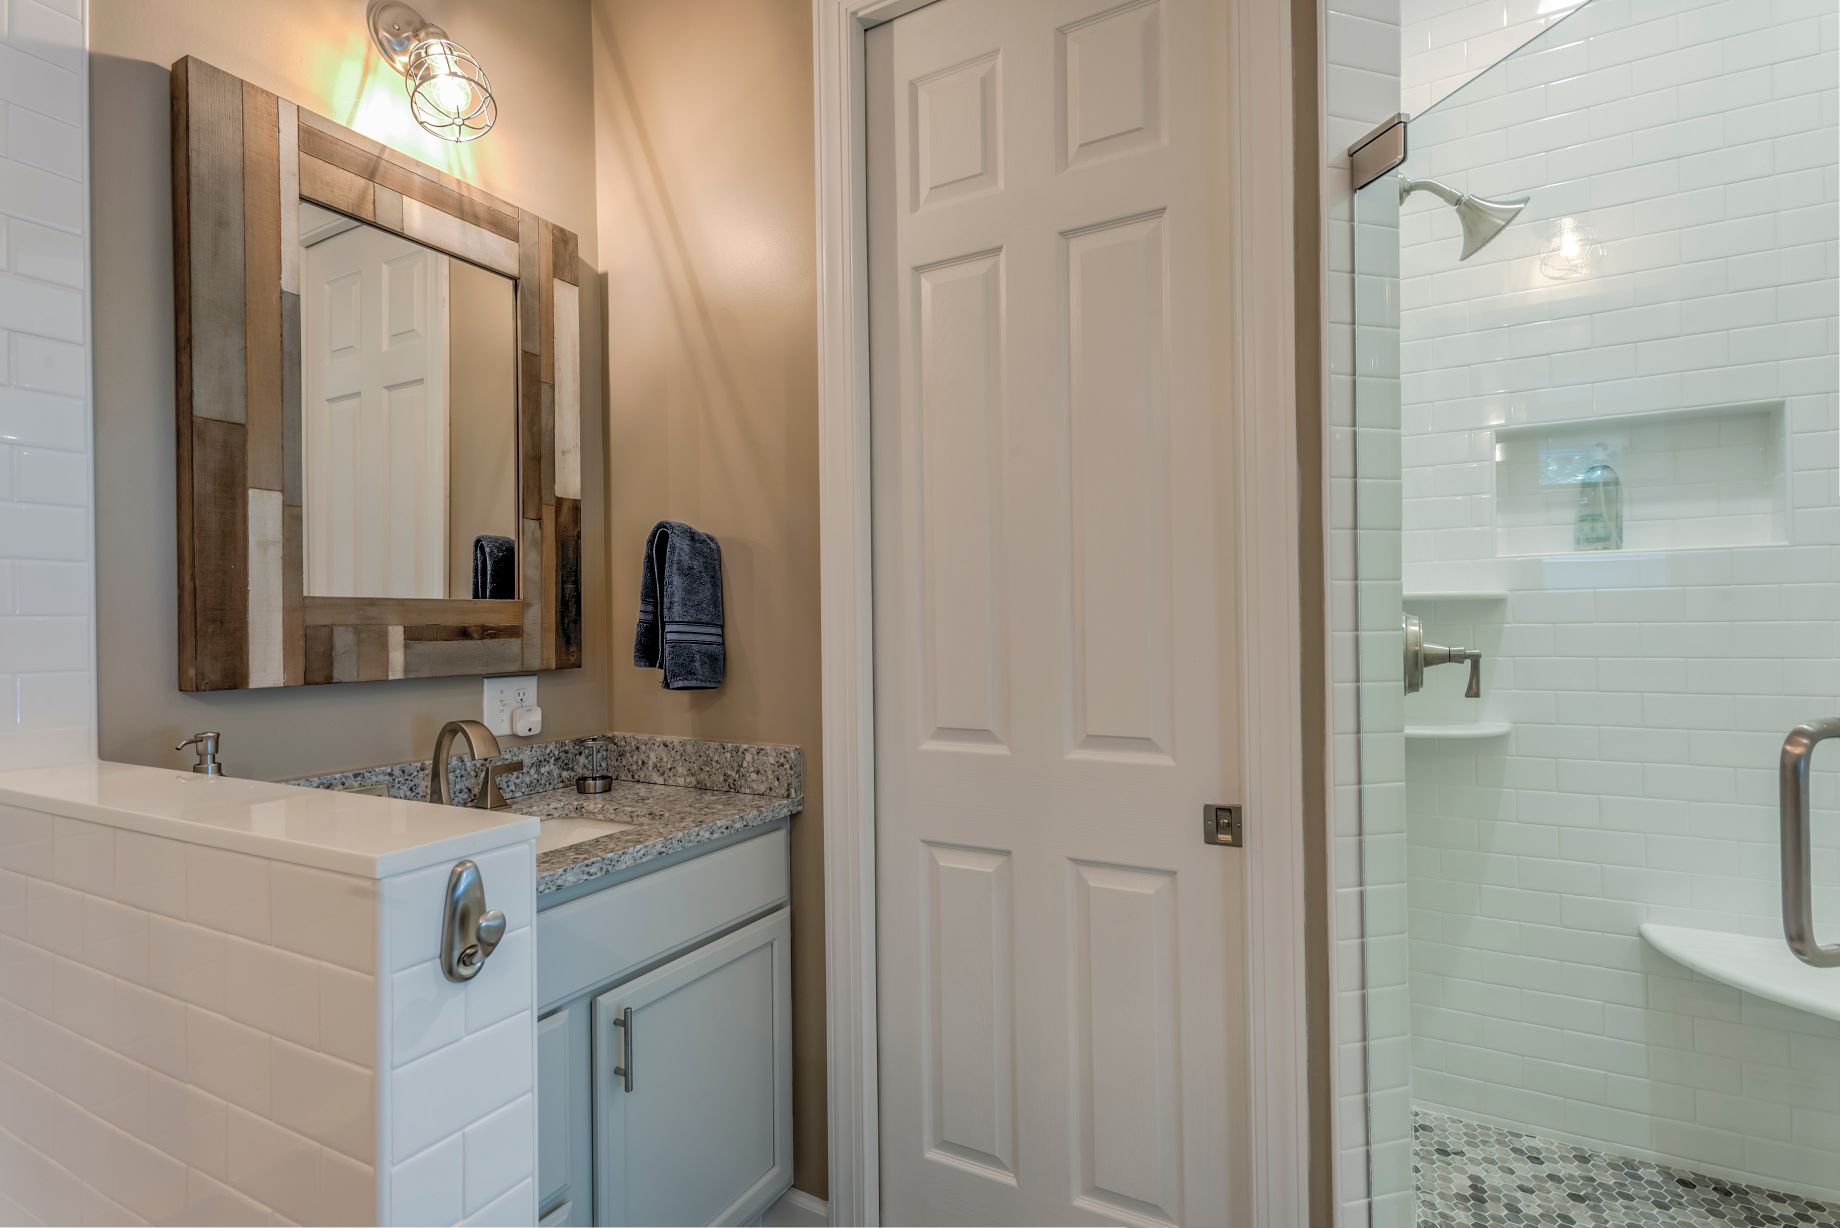 Addition in Juniper Court, Ocean Pines MD - Bathroom with Compact Sink and Large Square Mirror with Mosaic Frame